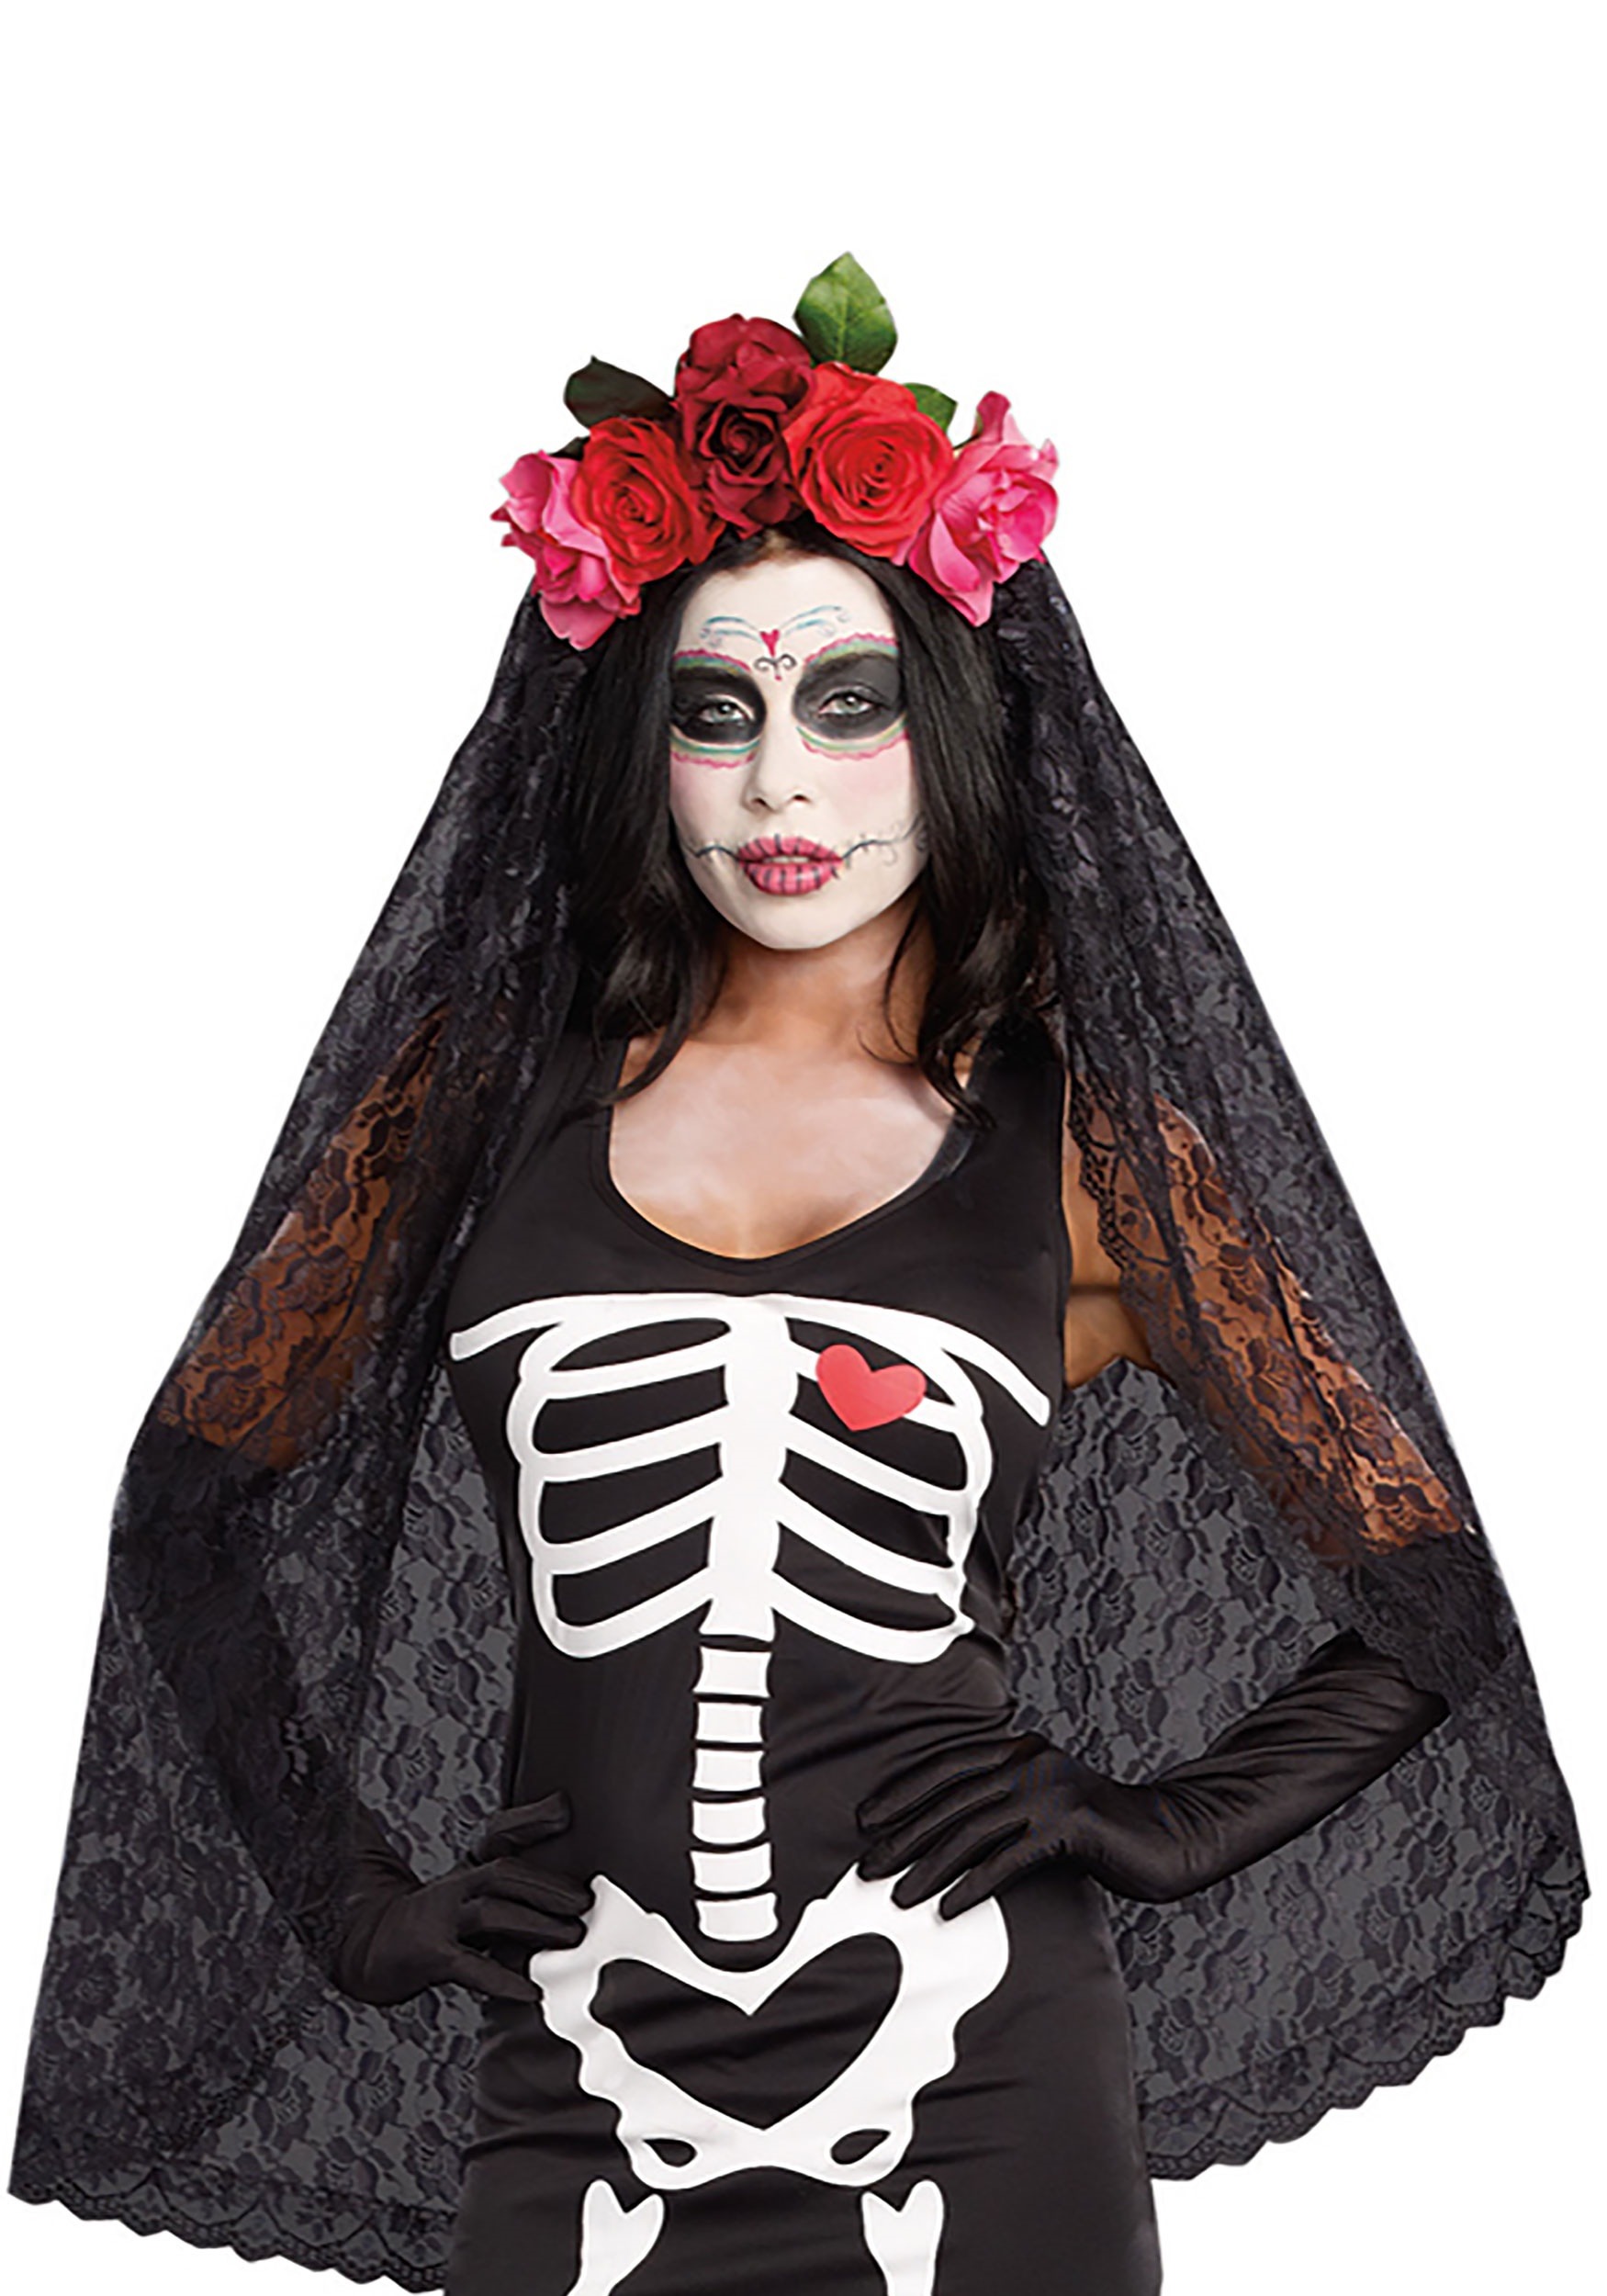 Women's Day of the Dead Headpiece Costume